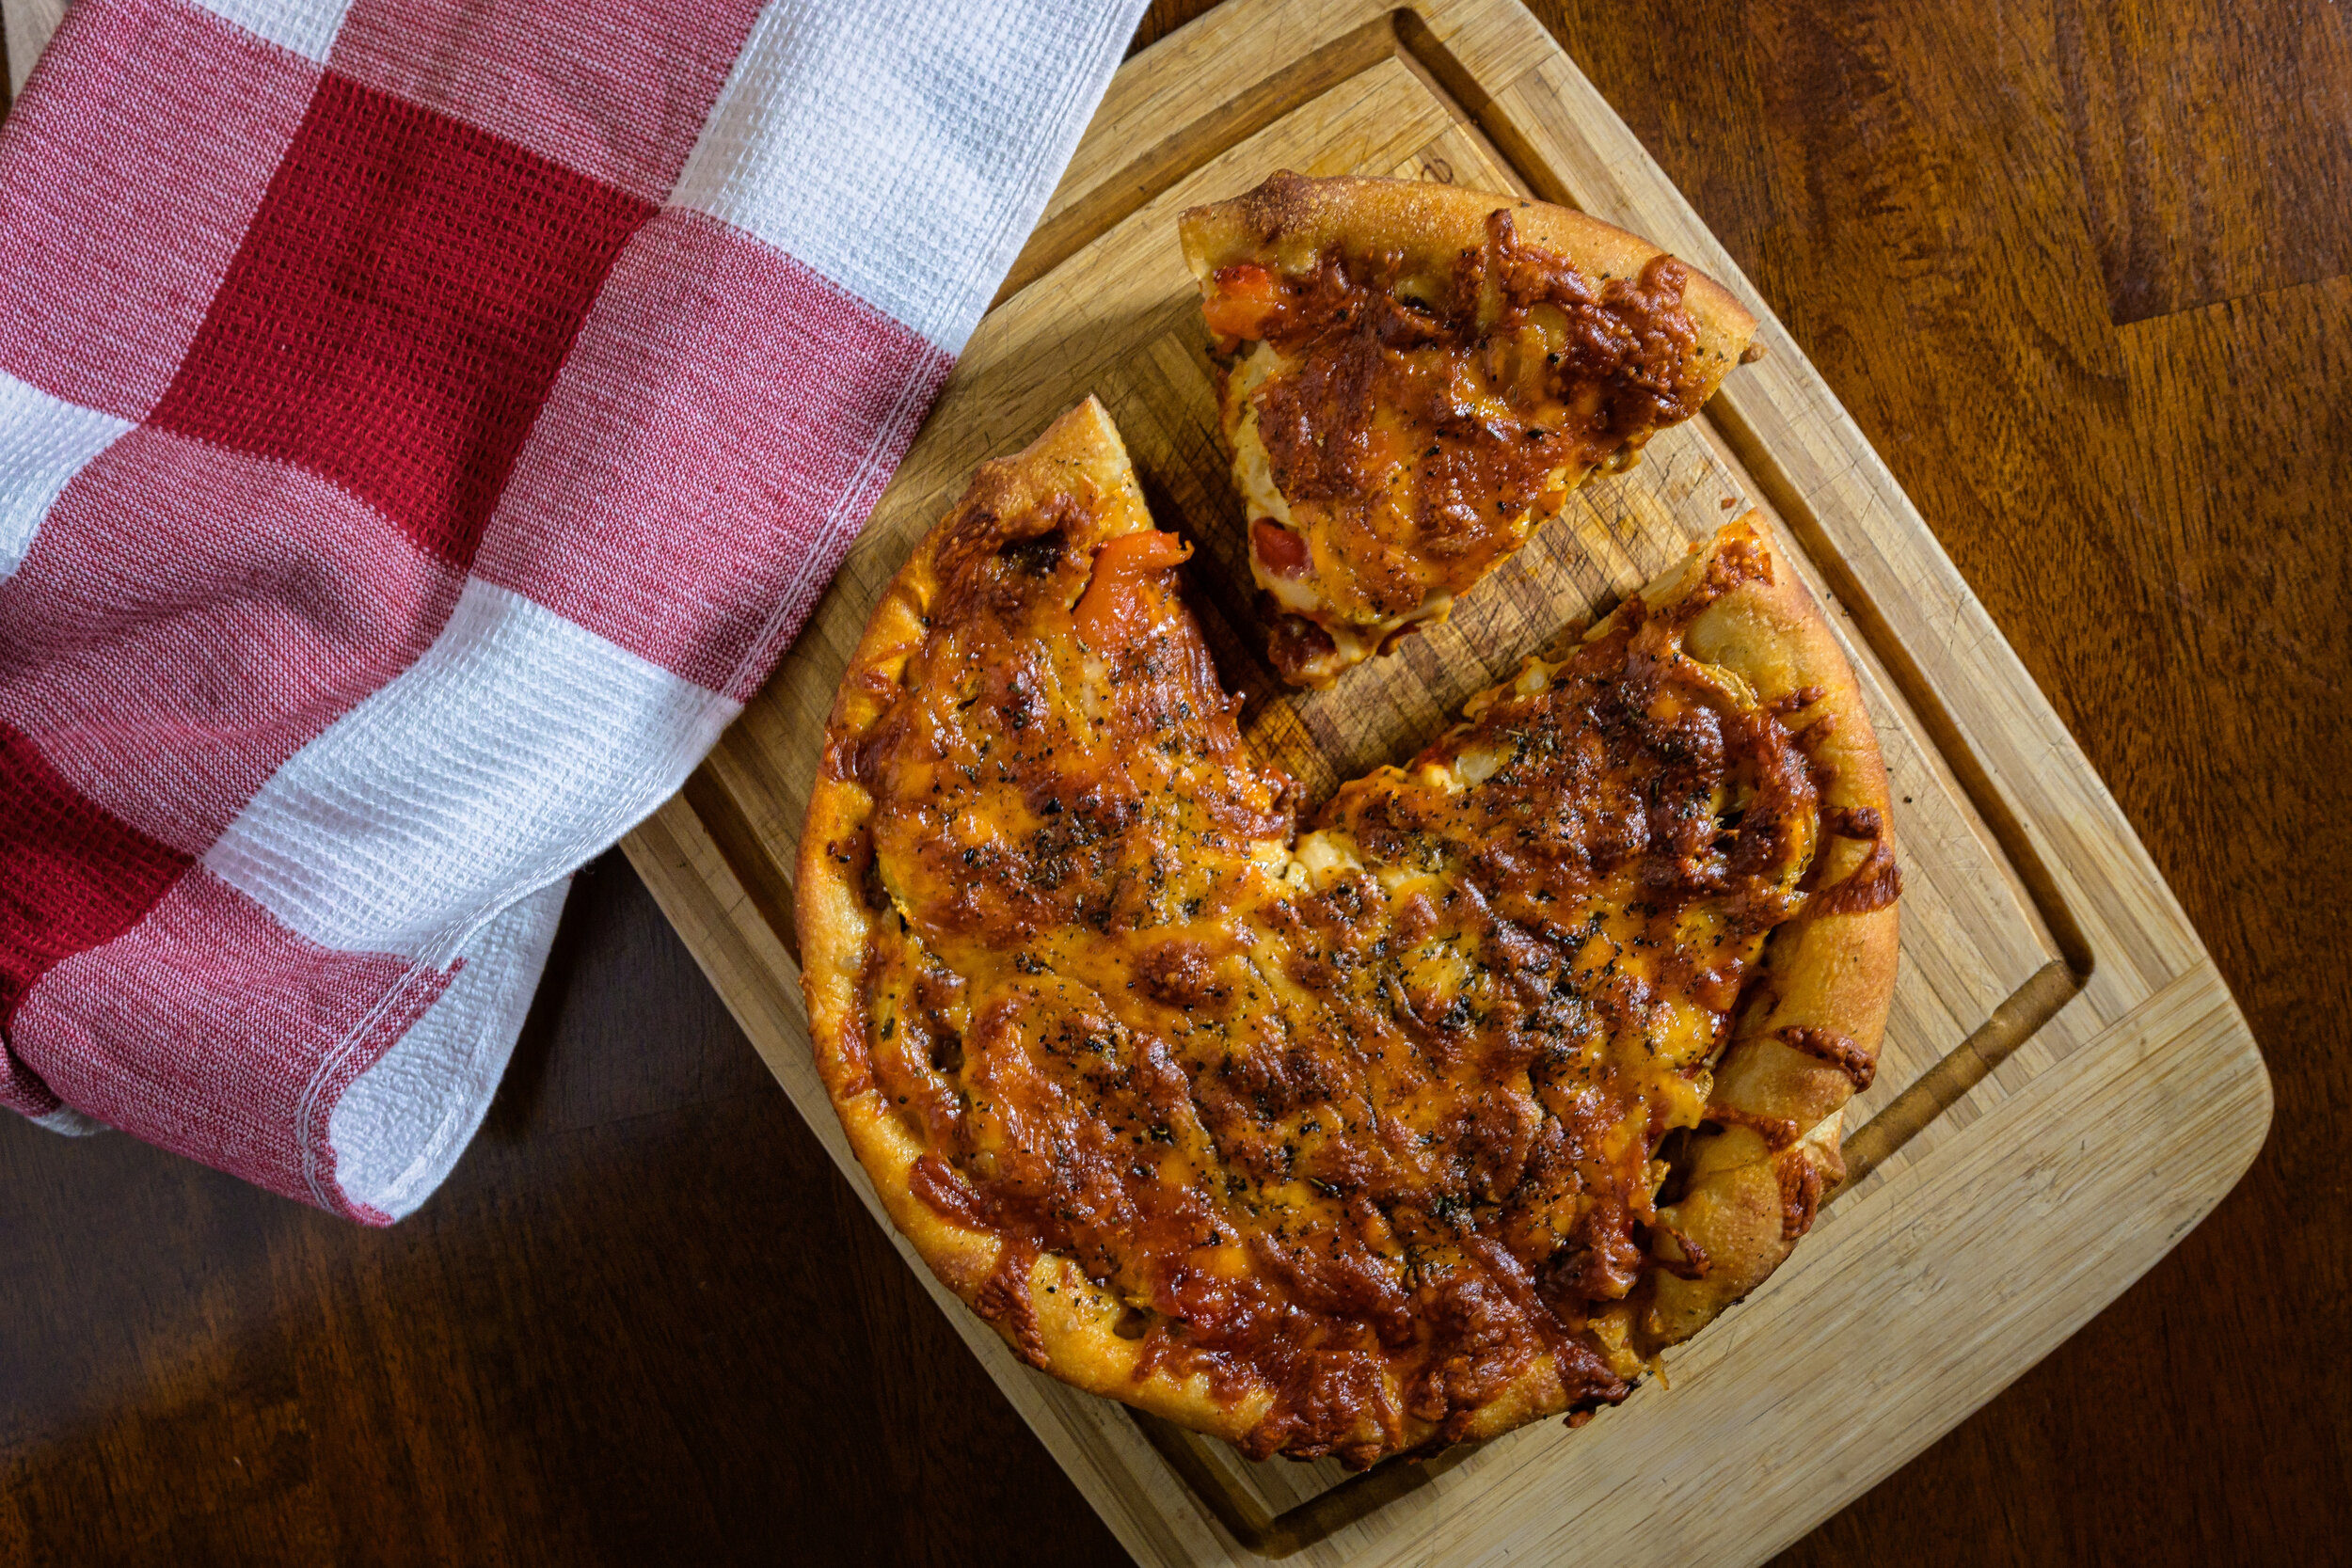 Grilled Sausage and Fennel Pizza